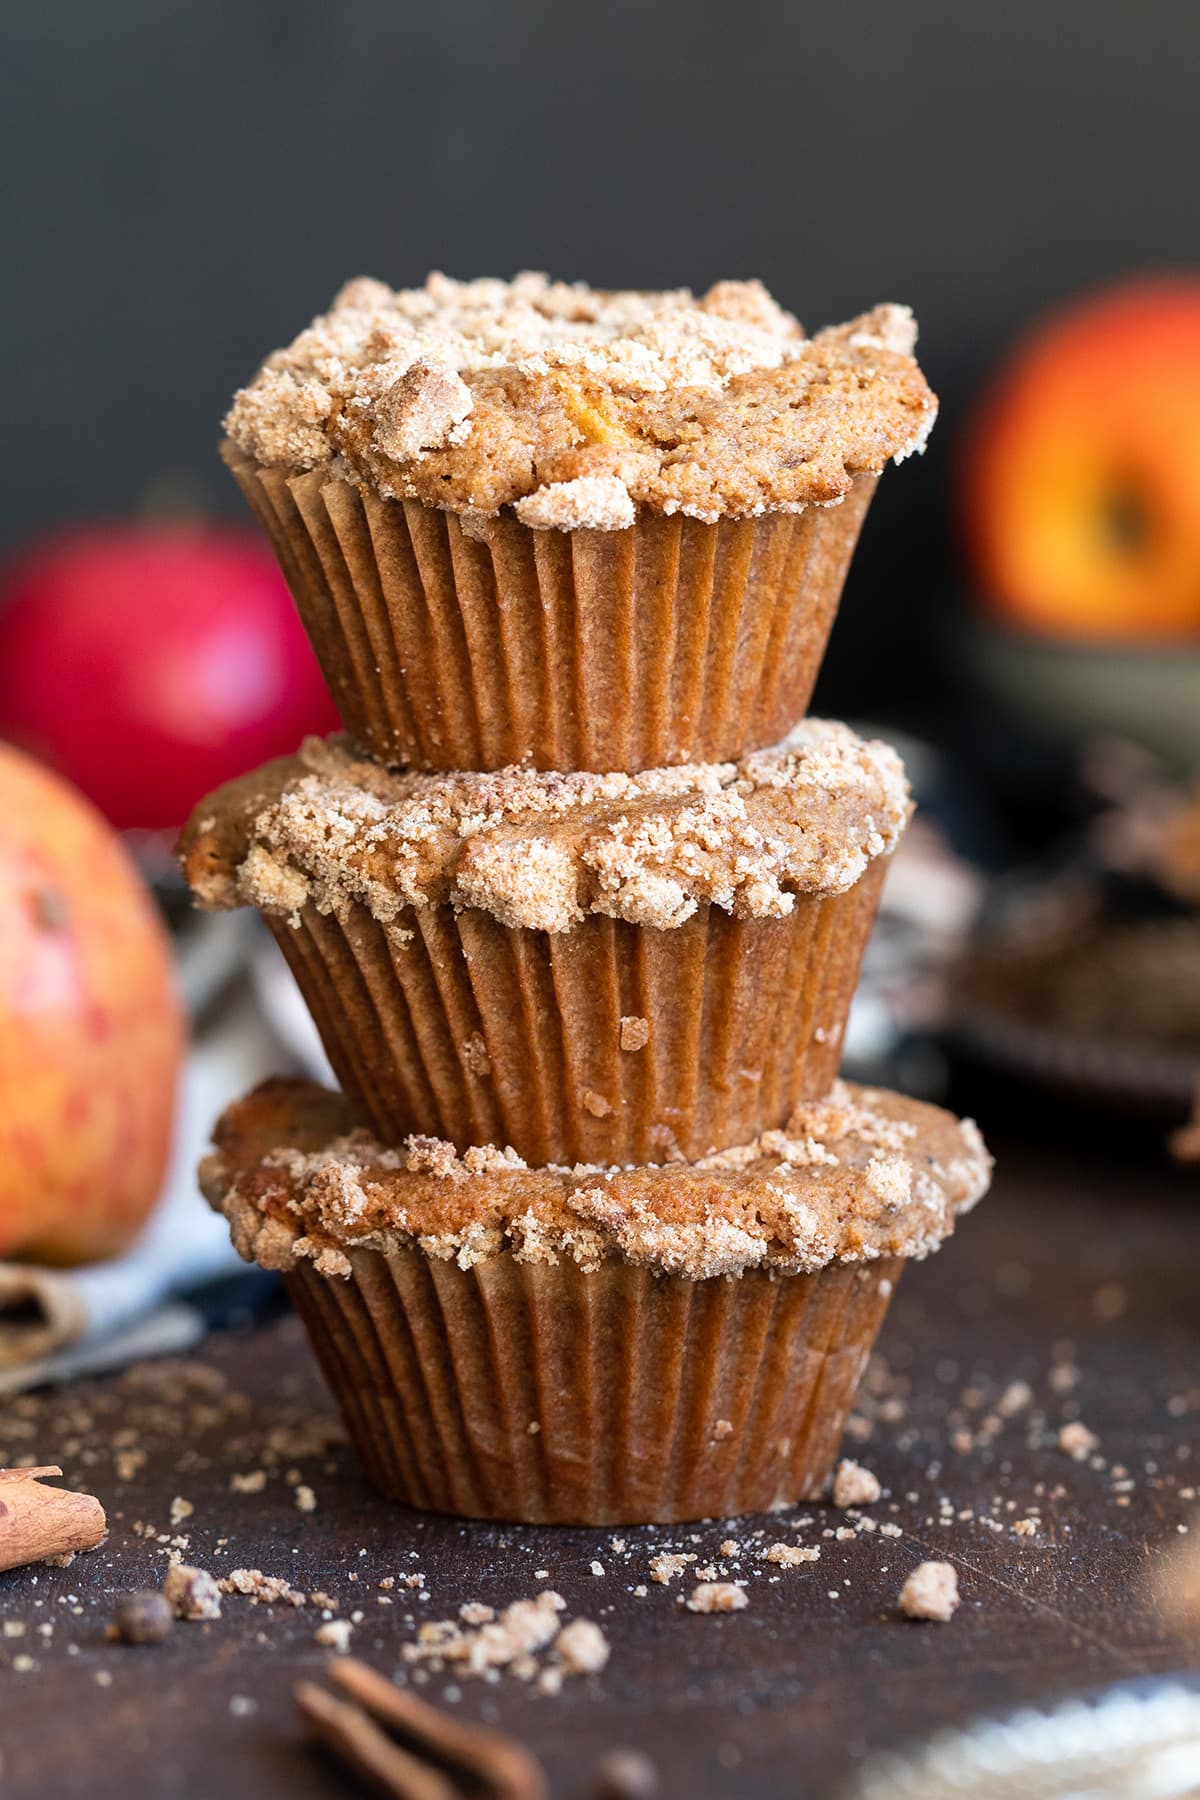 Apple muffins stacked on a wooden background.